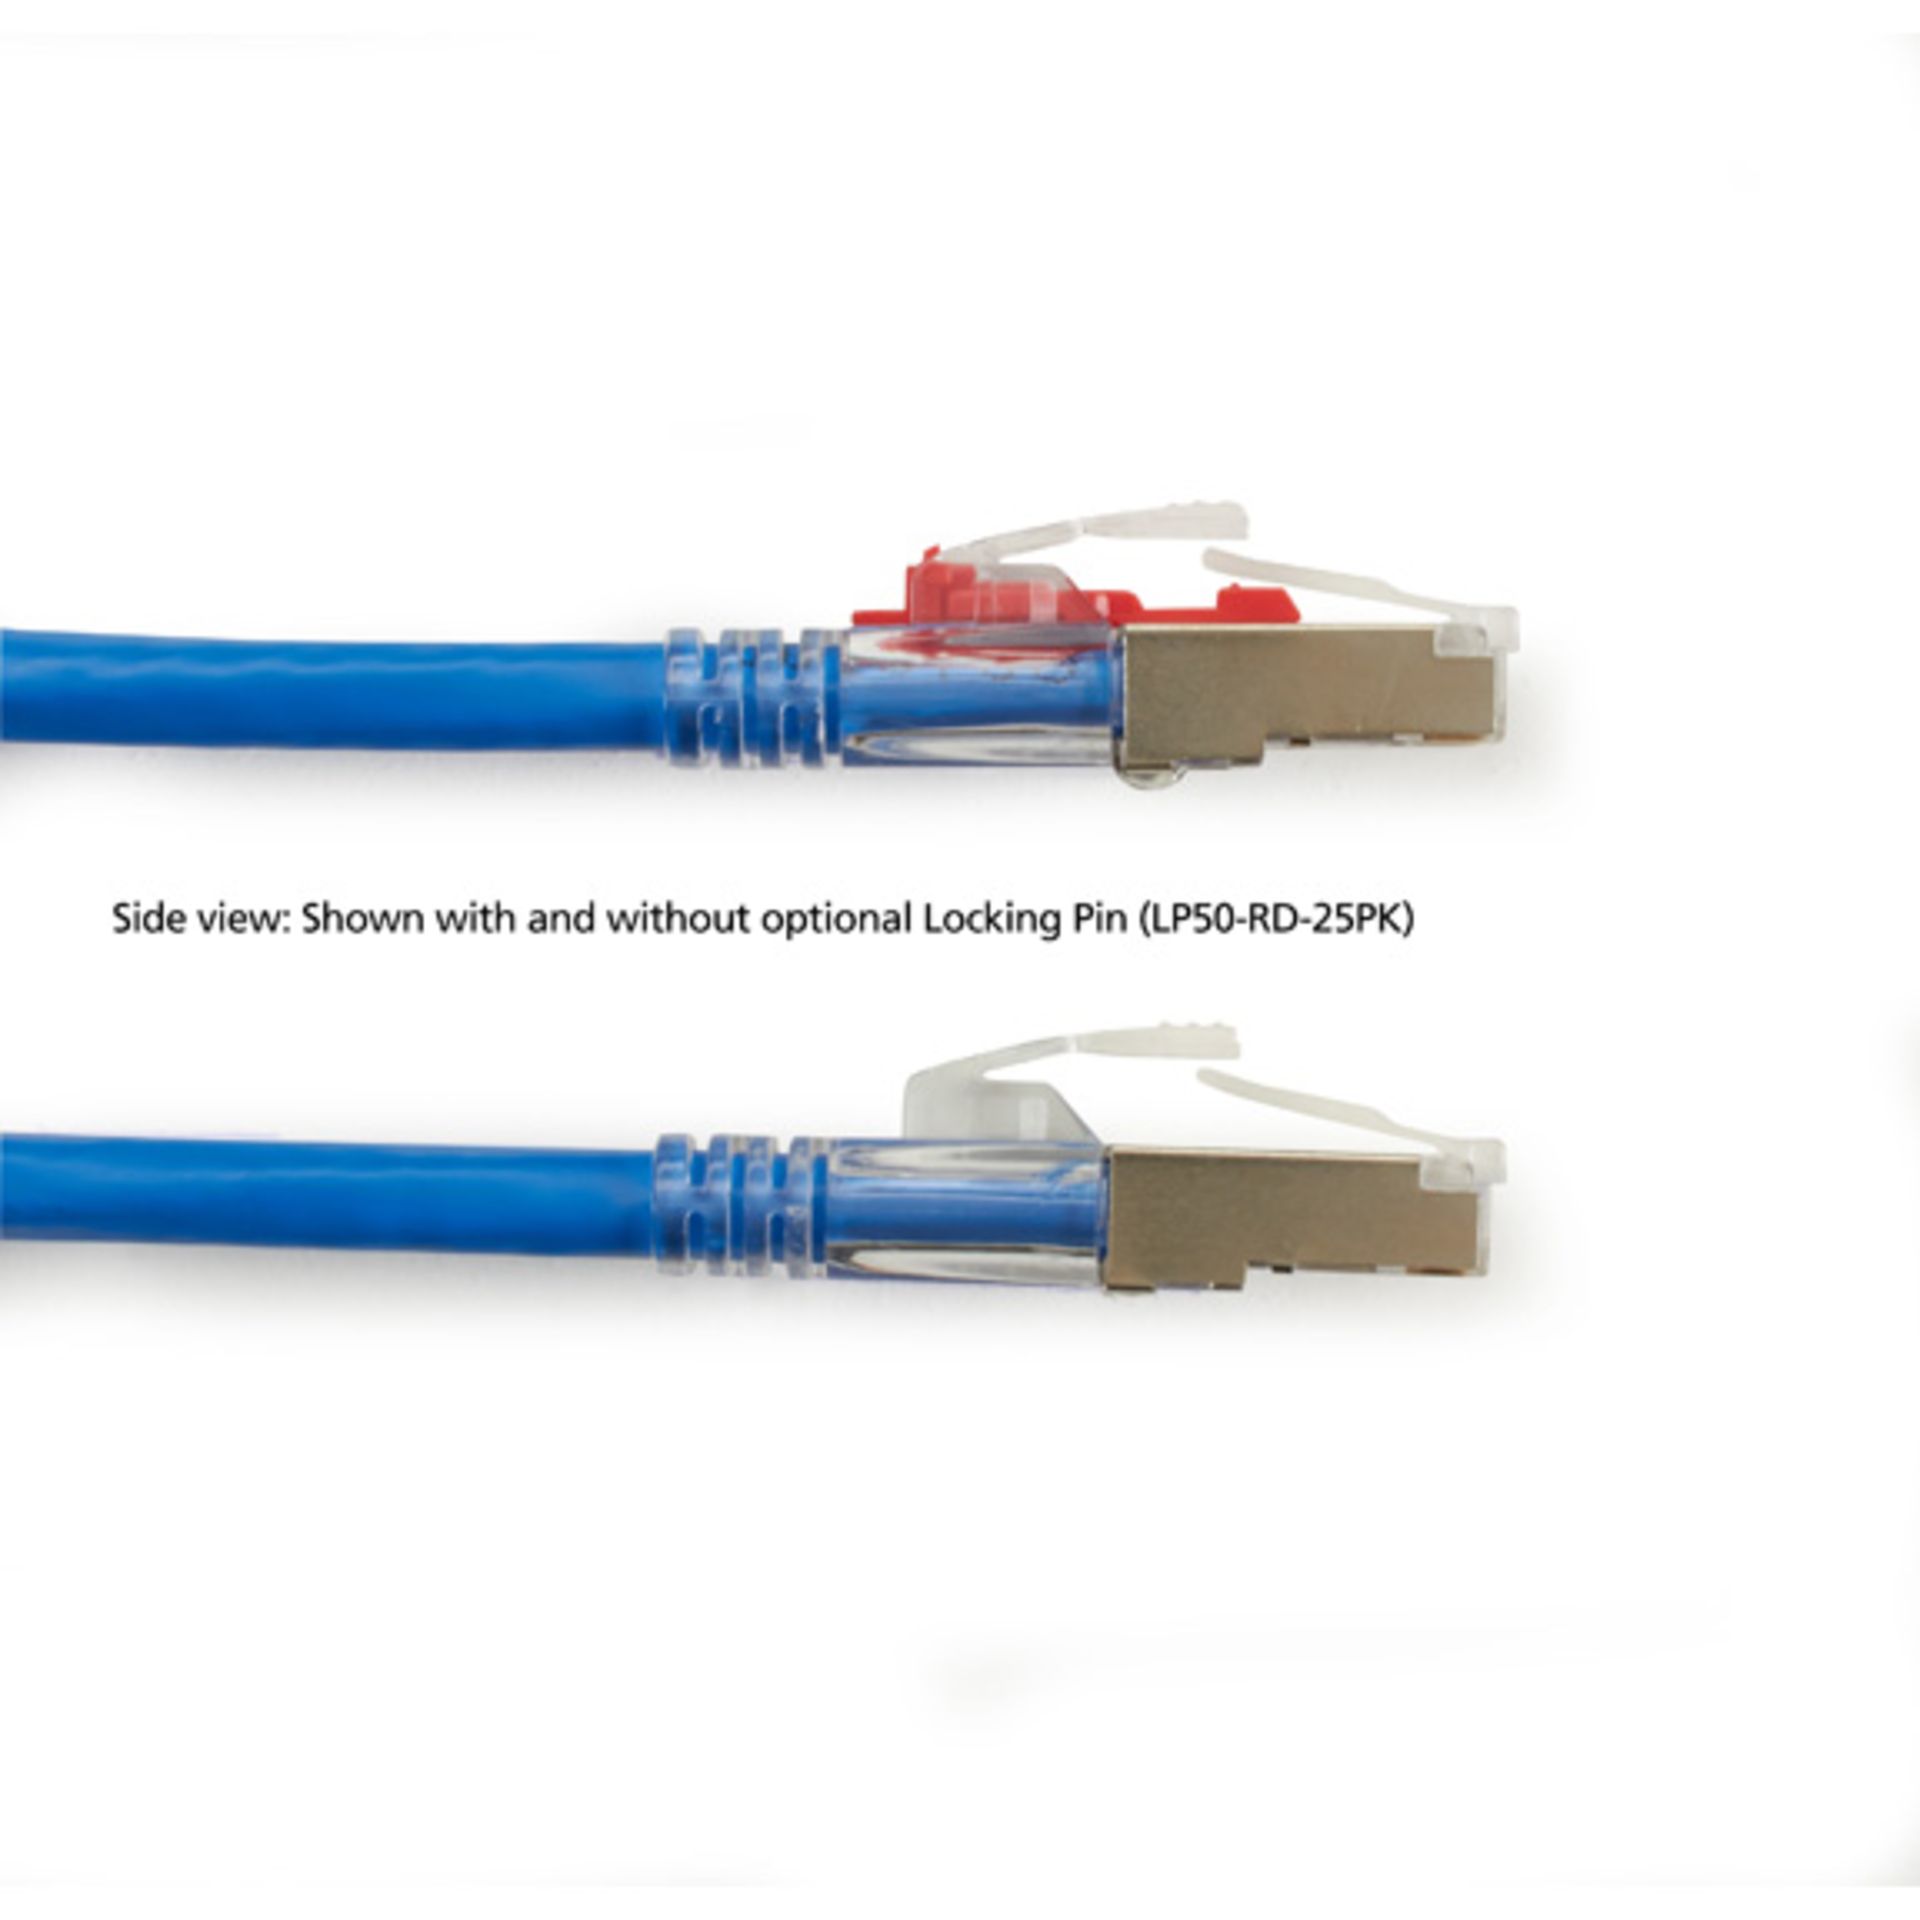 CAT5e Shielded Ethernet Patch Cables, Assorted Lengths, Black/Blue - Image 2 of 2